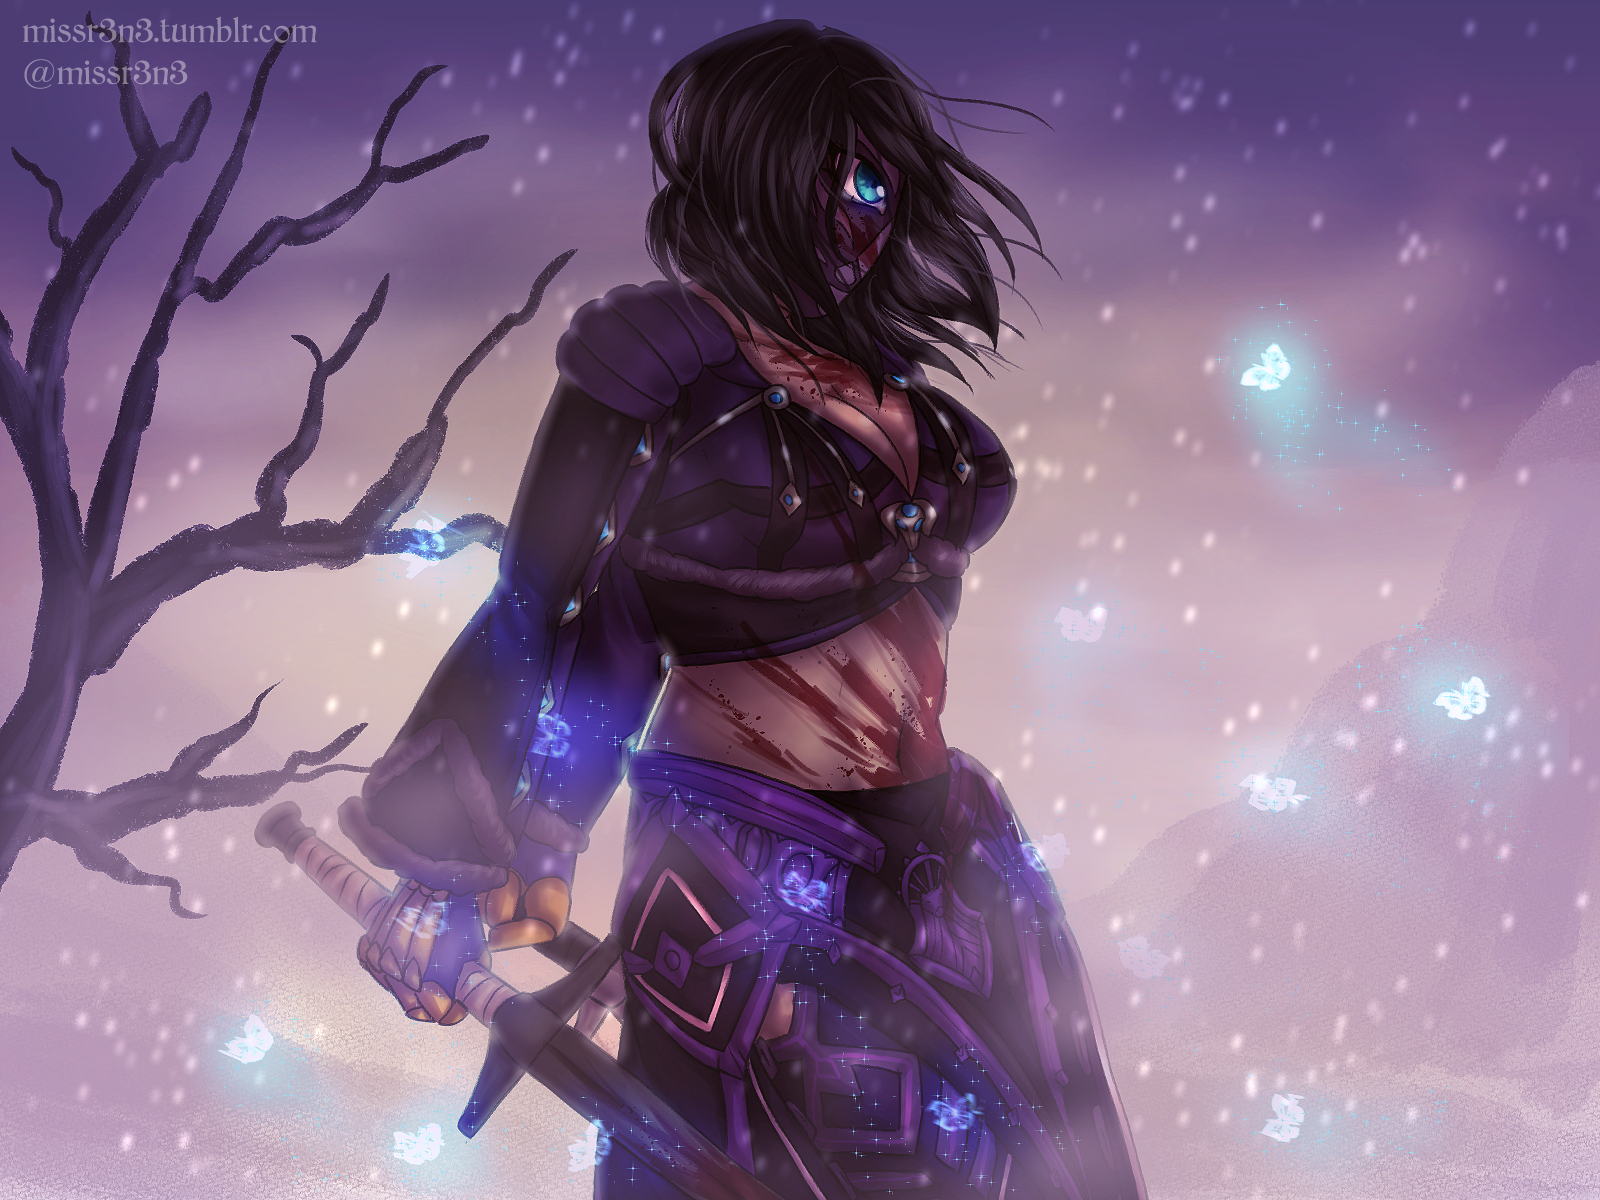 a drawing of my guild wars 2 norn commander OC, laila aulikki, standing on a snowy hill with a dead tree in the background. Her two swords and chest are splattered with blood, and blue mesmer butterflies flutter past her